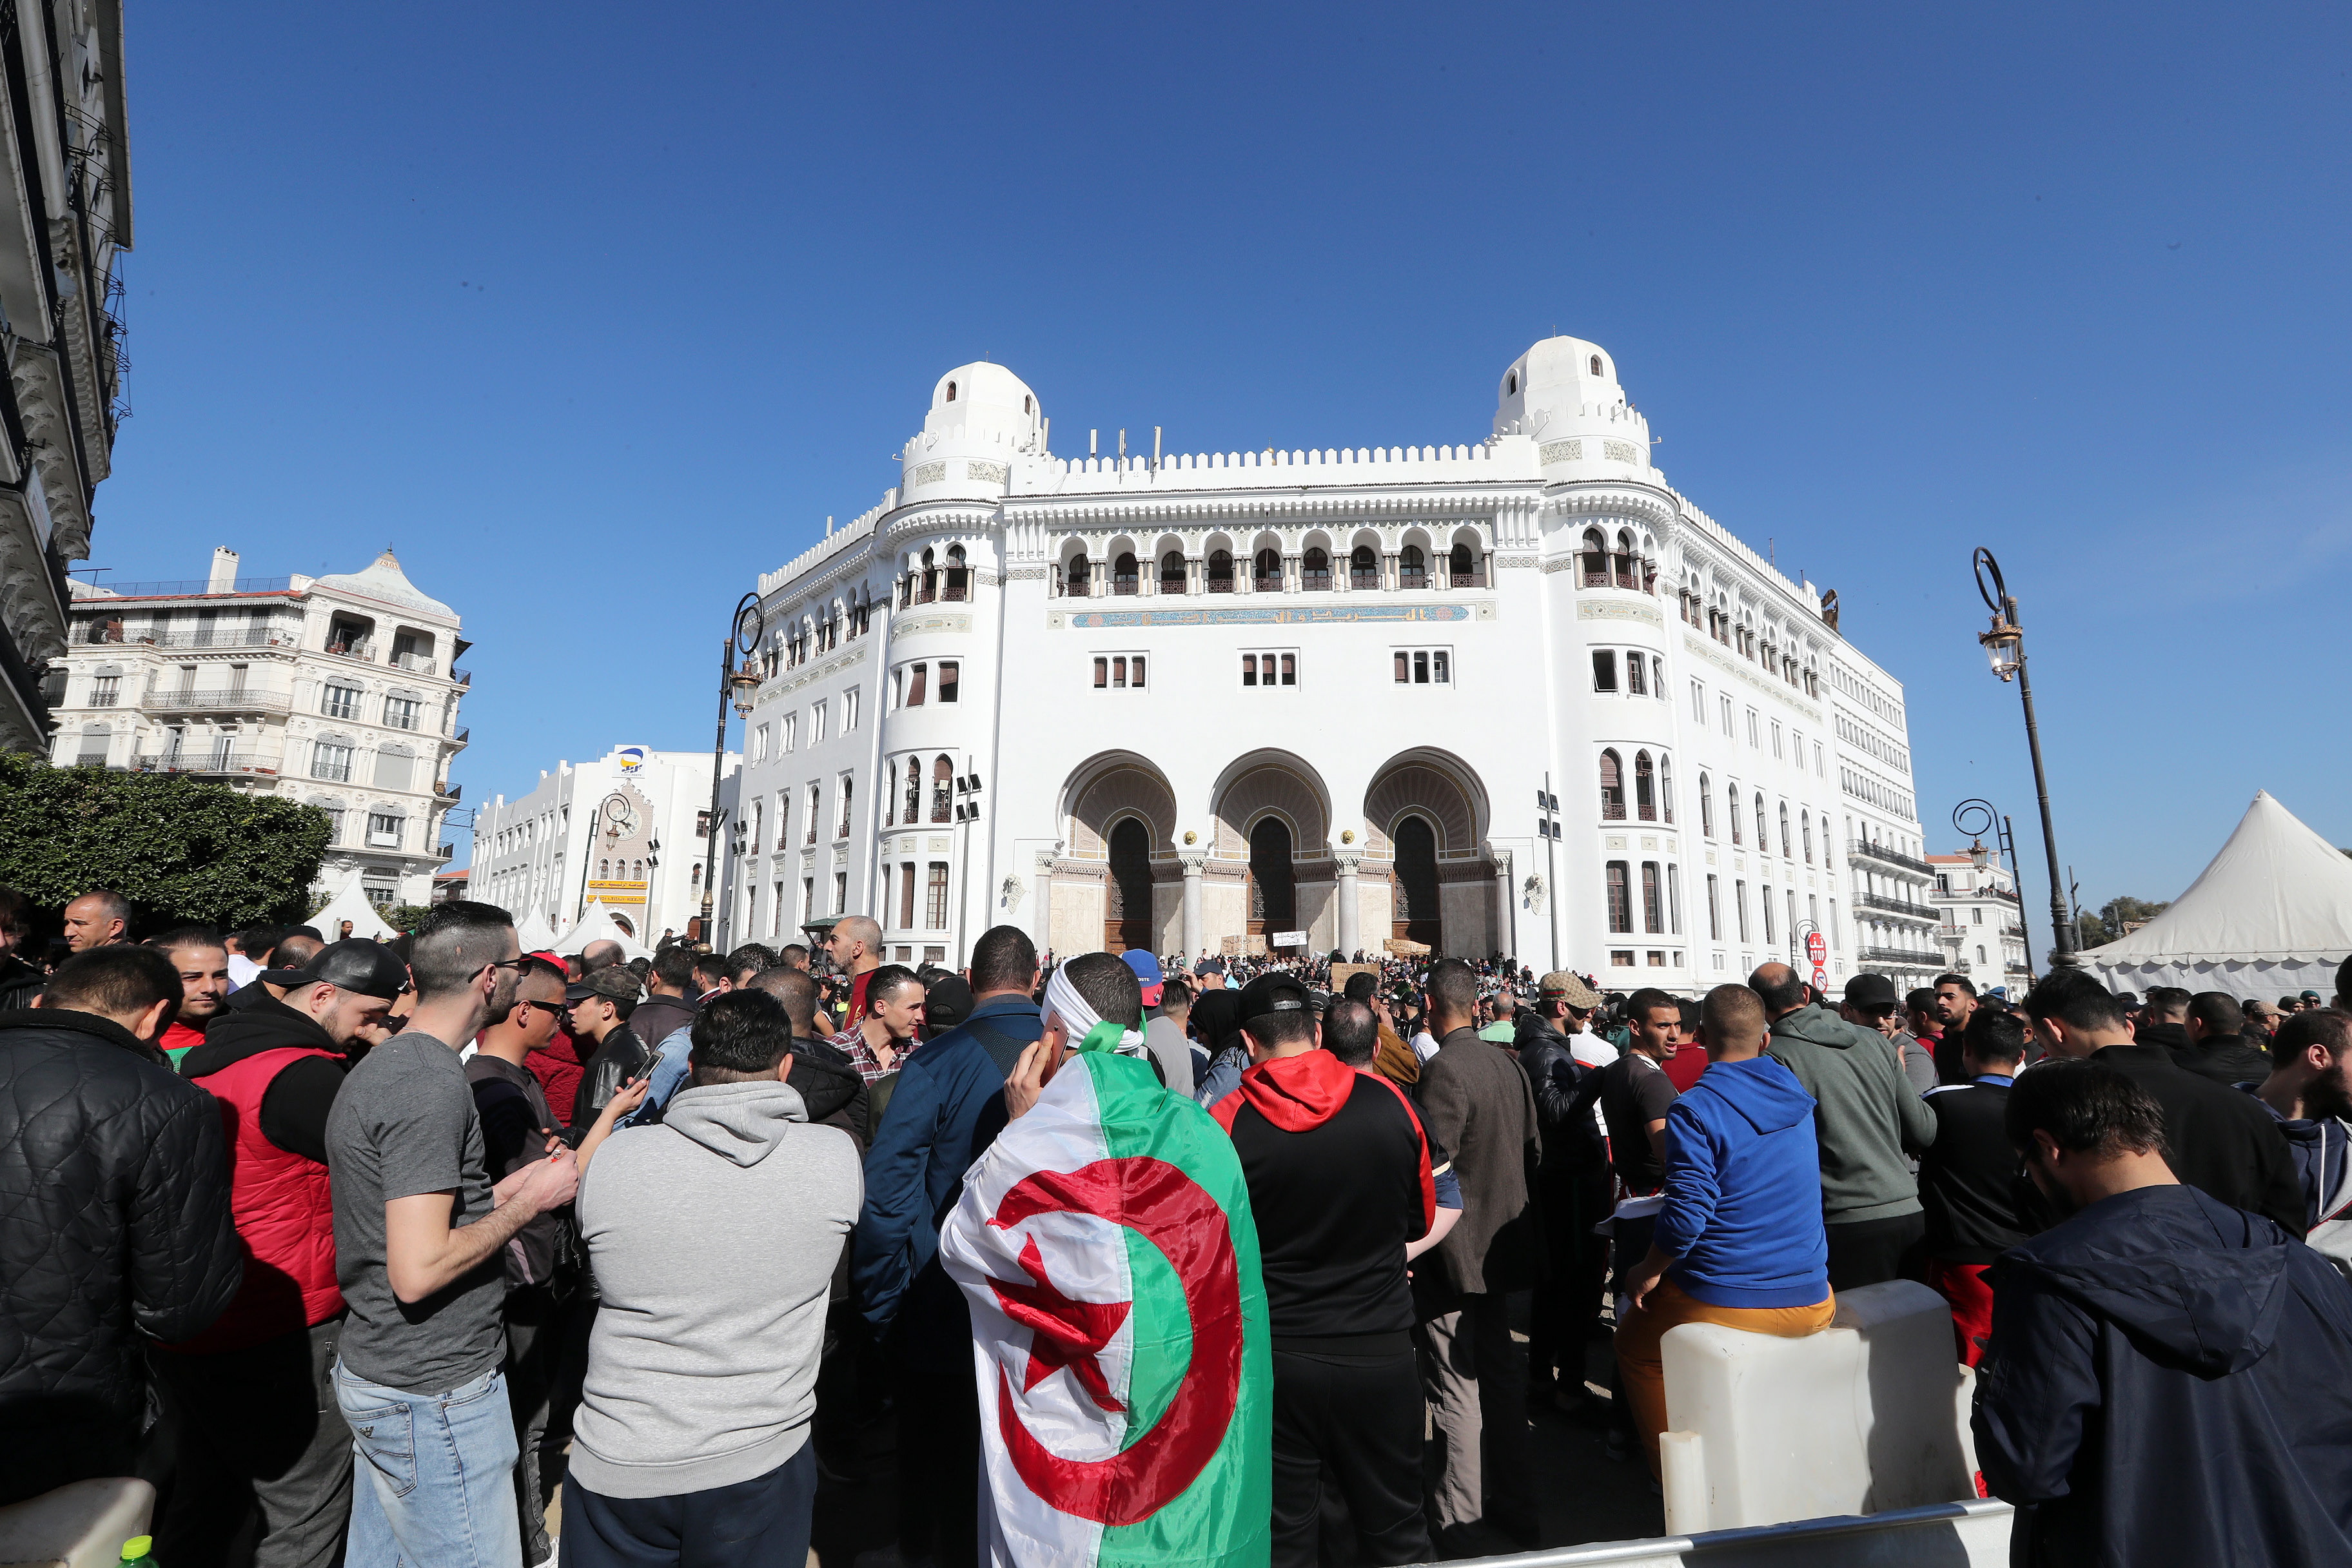 epa07406710 Algerian protesters chant slogans during a protest against the fifth term of Abdelaziz Bouteflika in Algiers, Algeria, 01 March 2019. Algerian authorities on 01 March braced for what are expected to be the largest protests in the Algerian capital in over a decade. Several protests and rallies were held in Algeria since Bouteflika serving as the president since 1999, announced he will be running for a fifth term in presidential elections scheduled for 18 April 2019.  EPA/MOHAMED MESSARA